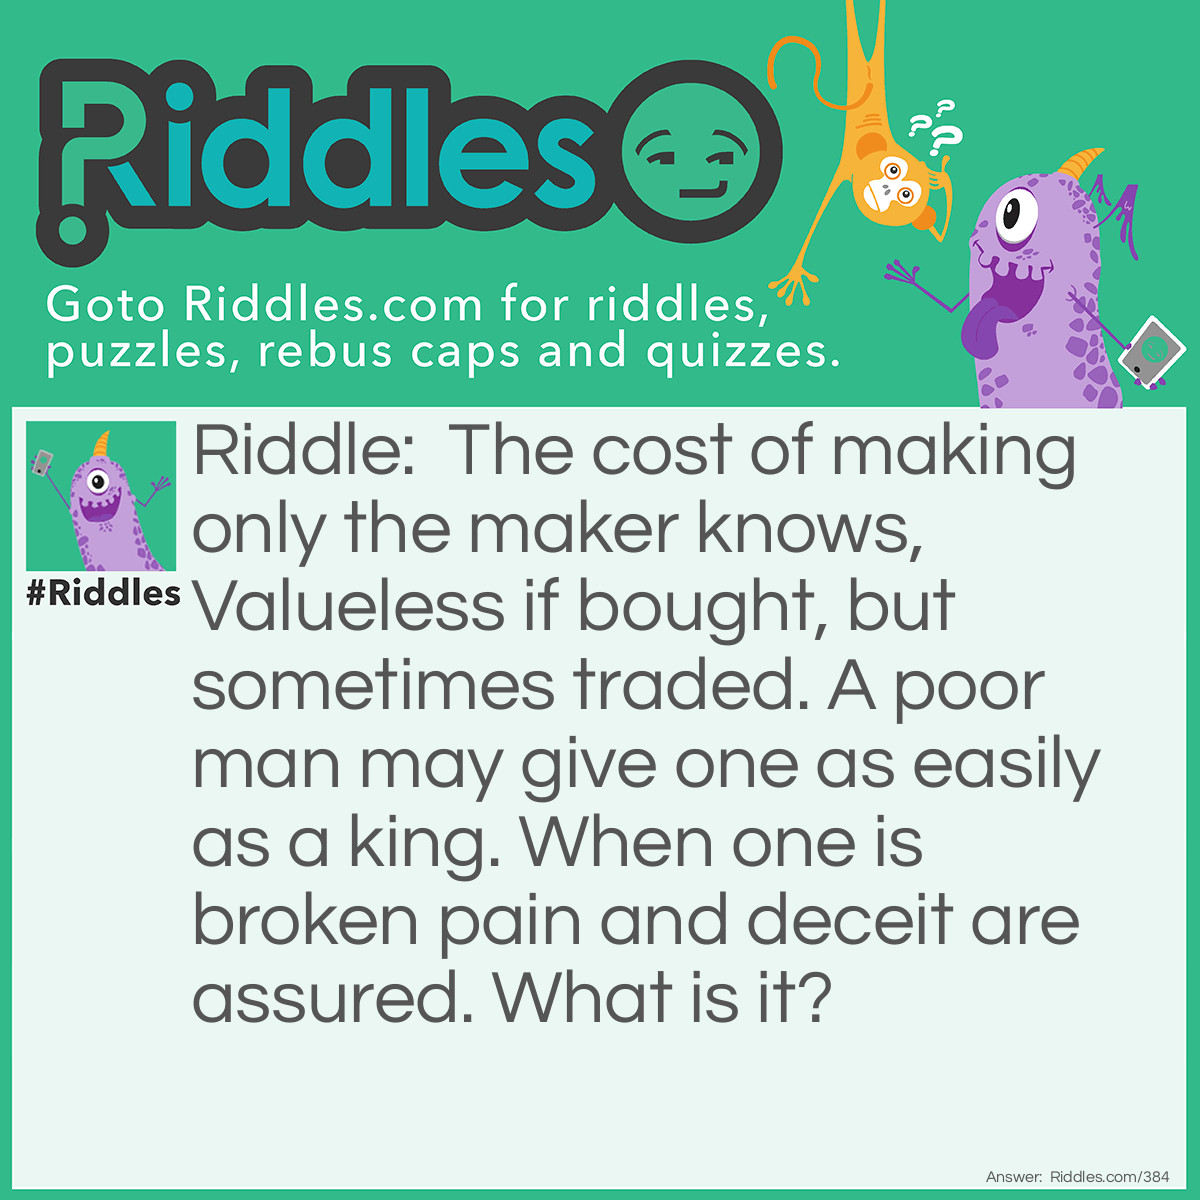 Riddle: The cost of making only the maker knows, Valueless if bought, but sometimes traded. A poor man may give one as easily as a king. When one is broken pain and deceit are assured. What is it? Answer: Promise.